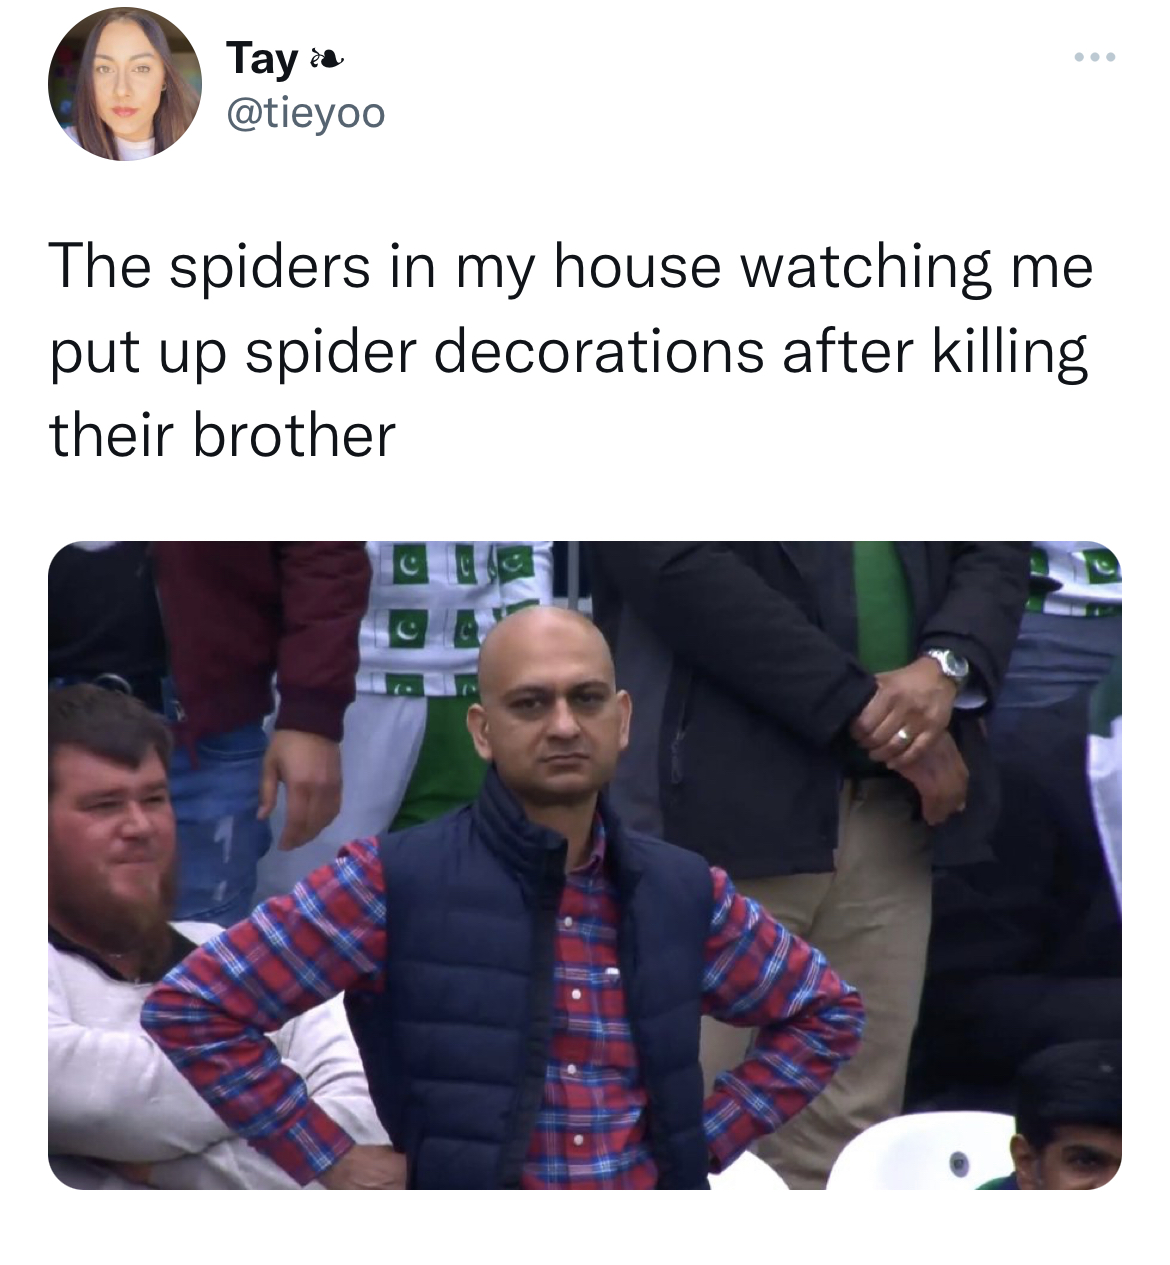 Savage Tweets - cricket meme - Tay The spiders in my house watching put up spider decorations after killing their brother